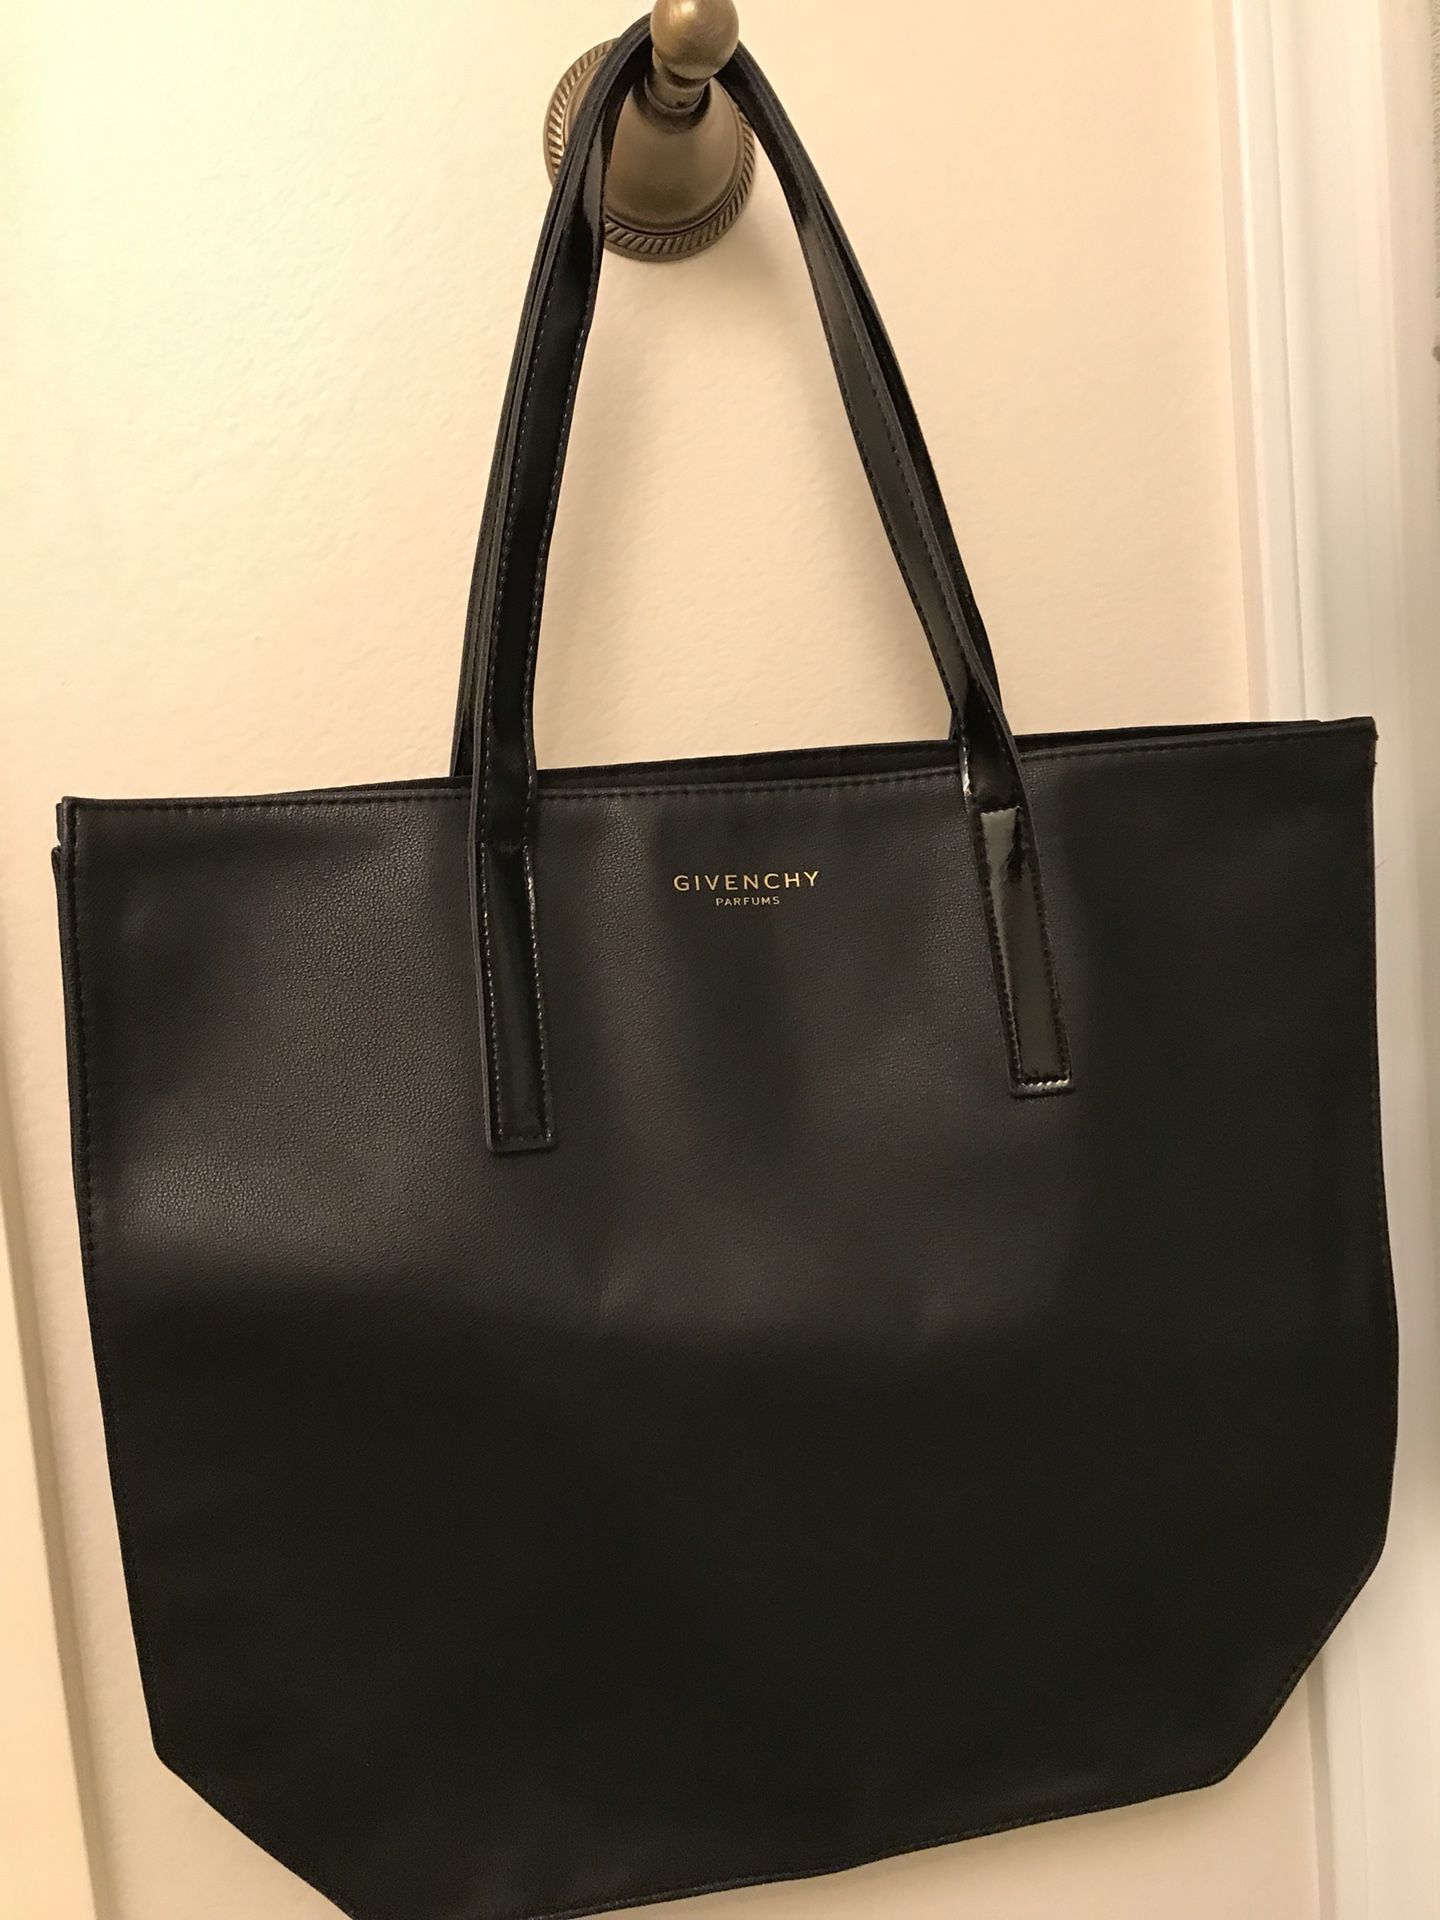 Givenchy tote bag - new without tags